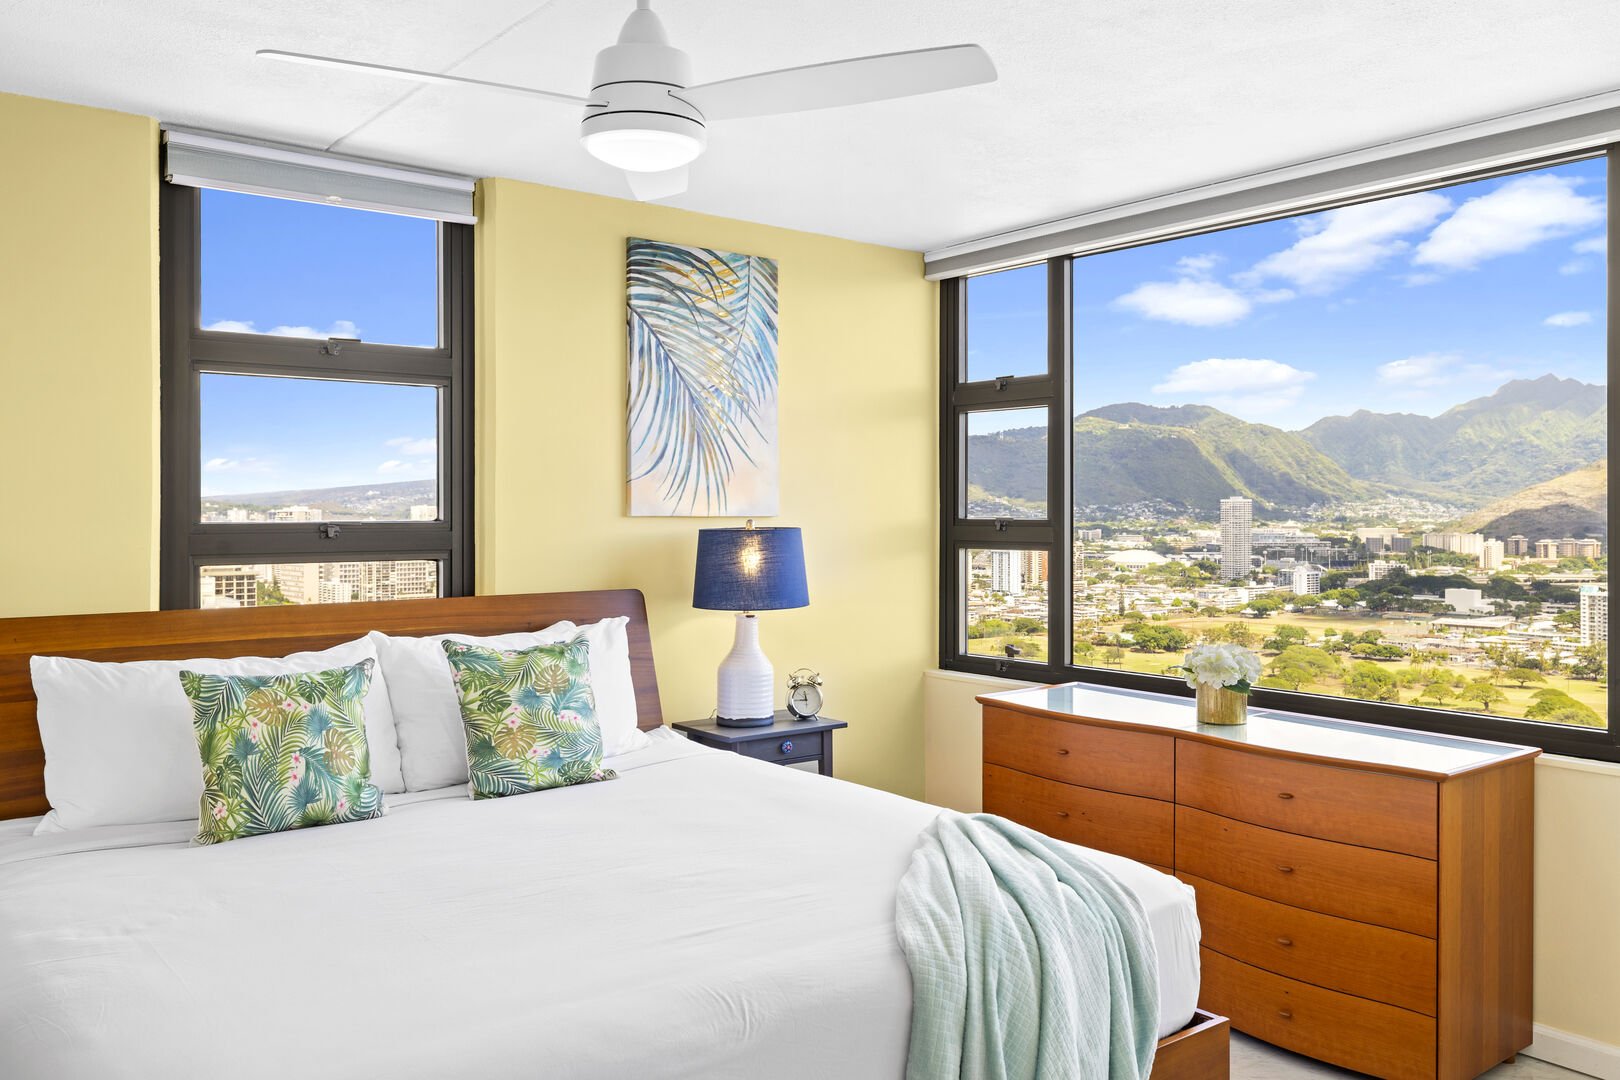 Bedroom with comfortable King-size bed,  ceiling fan, dresser and gorgeous mountain view